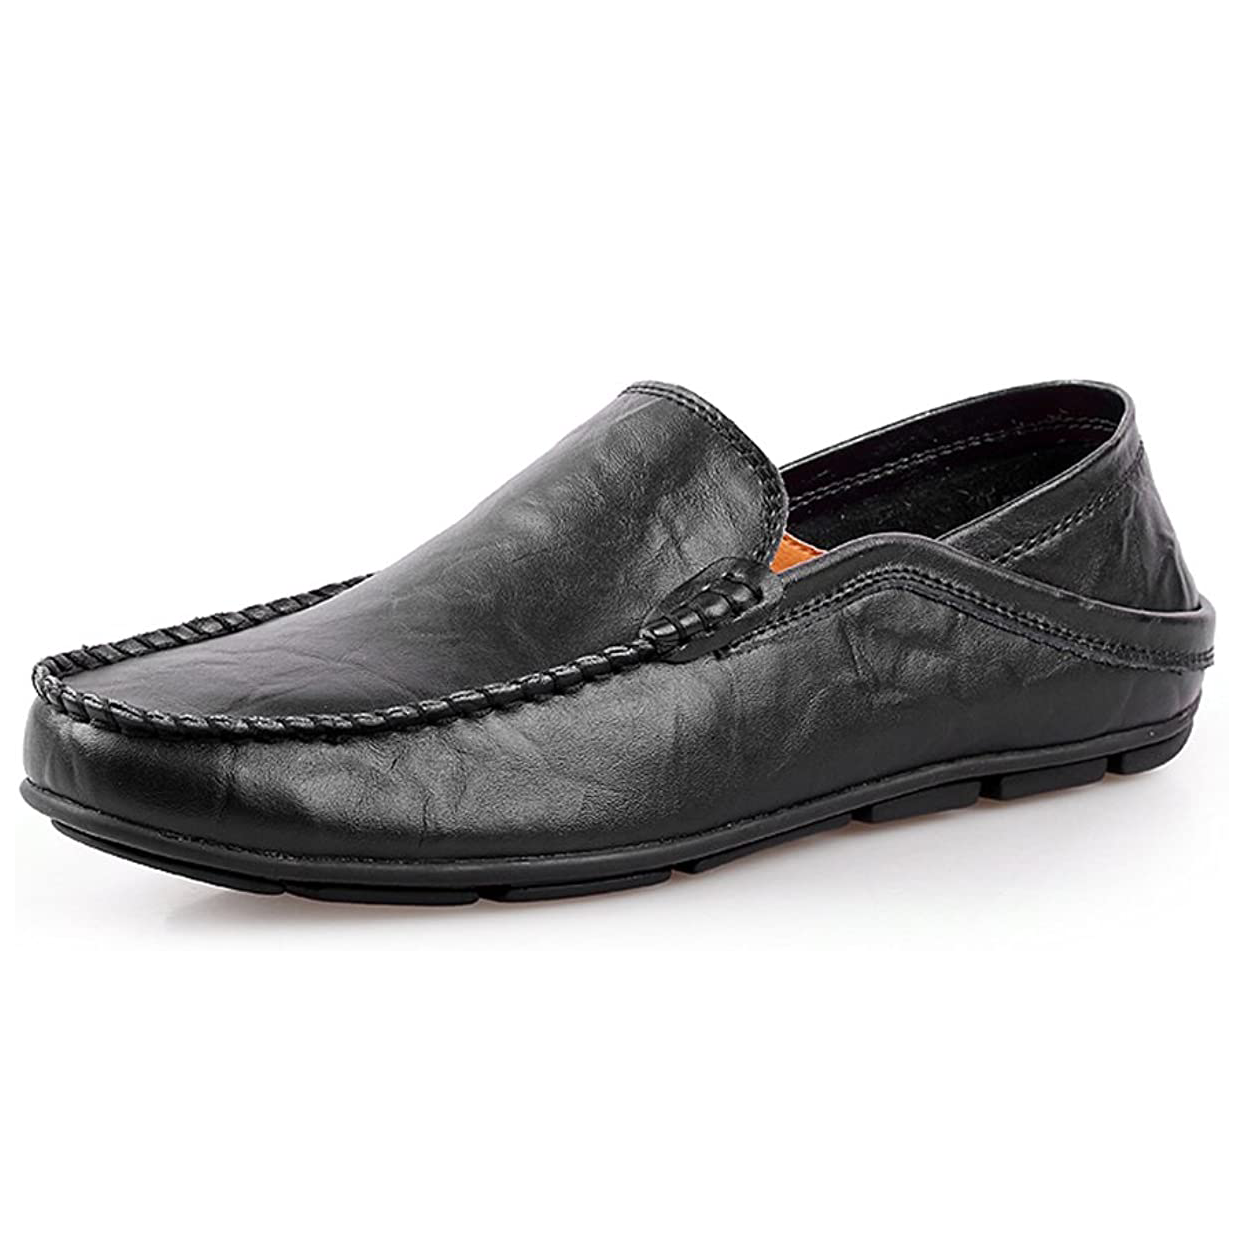 🔥Hot Sale 🎉 Men's Comfy Casual Leather Driving Style Slip On Leather Loafer